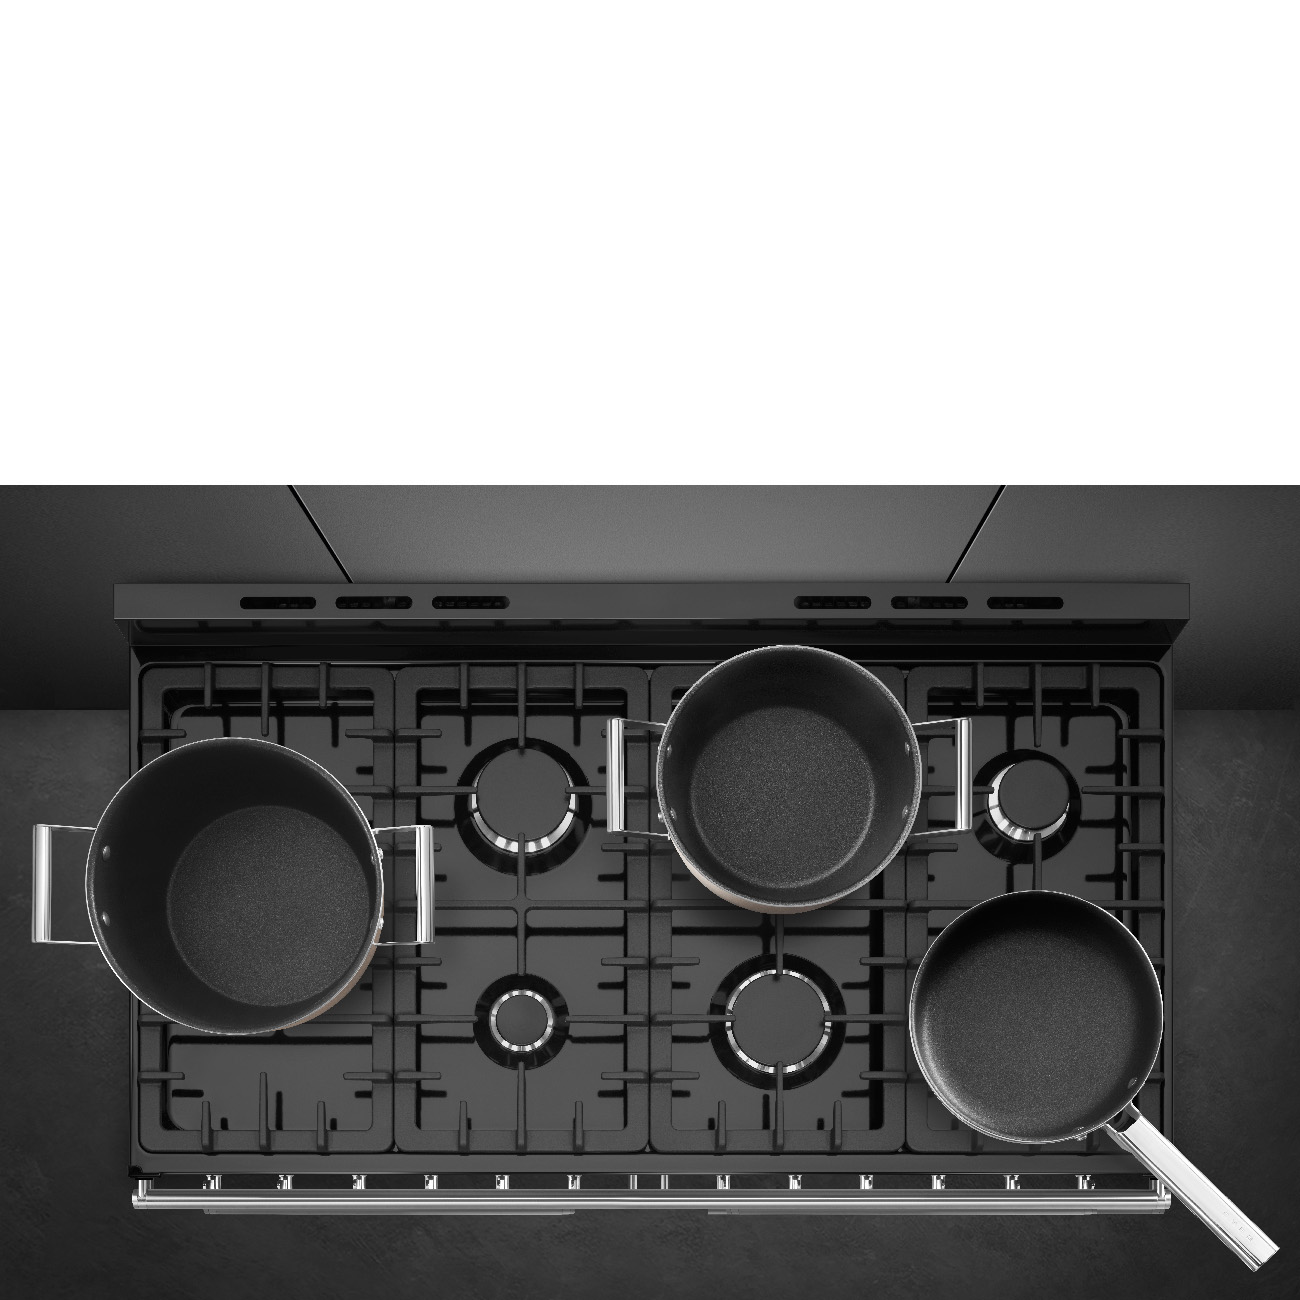 Smeg Stainless steel Cooker with Gas Hob_8